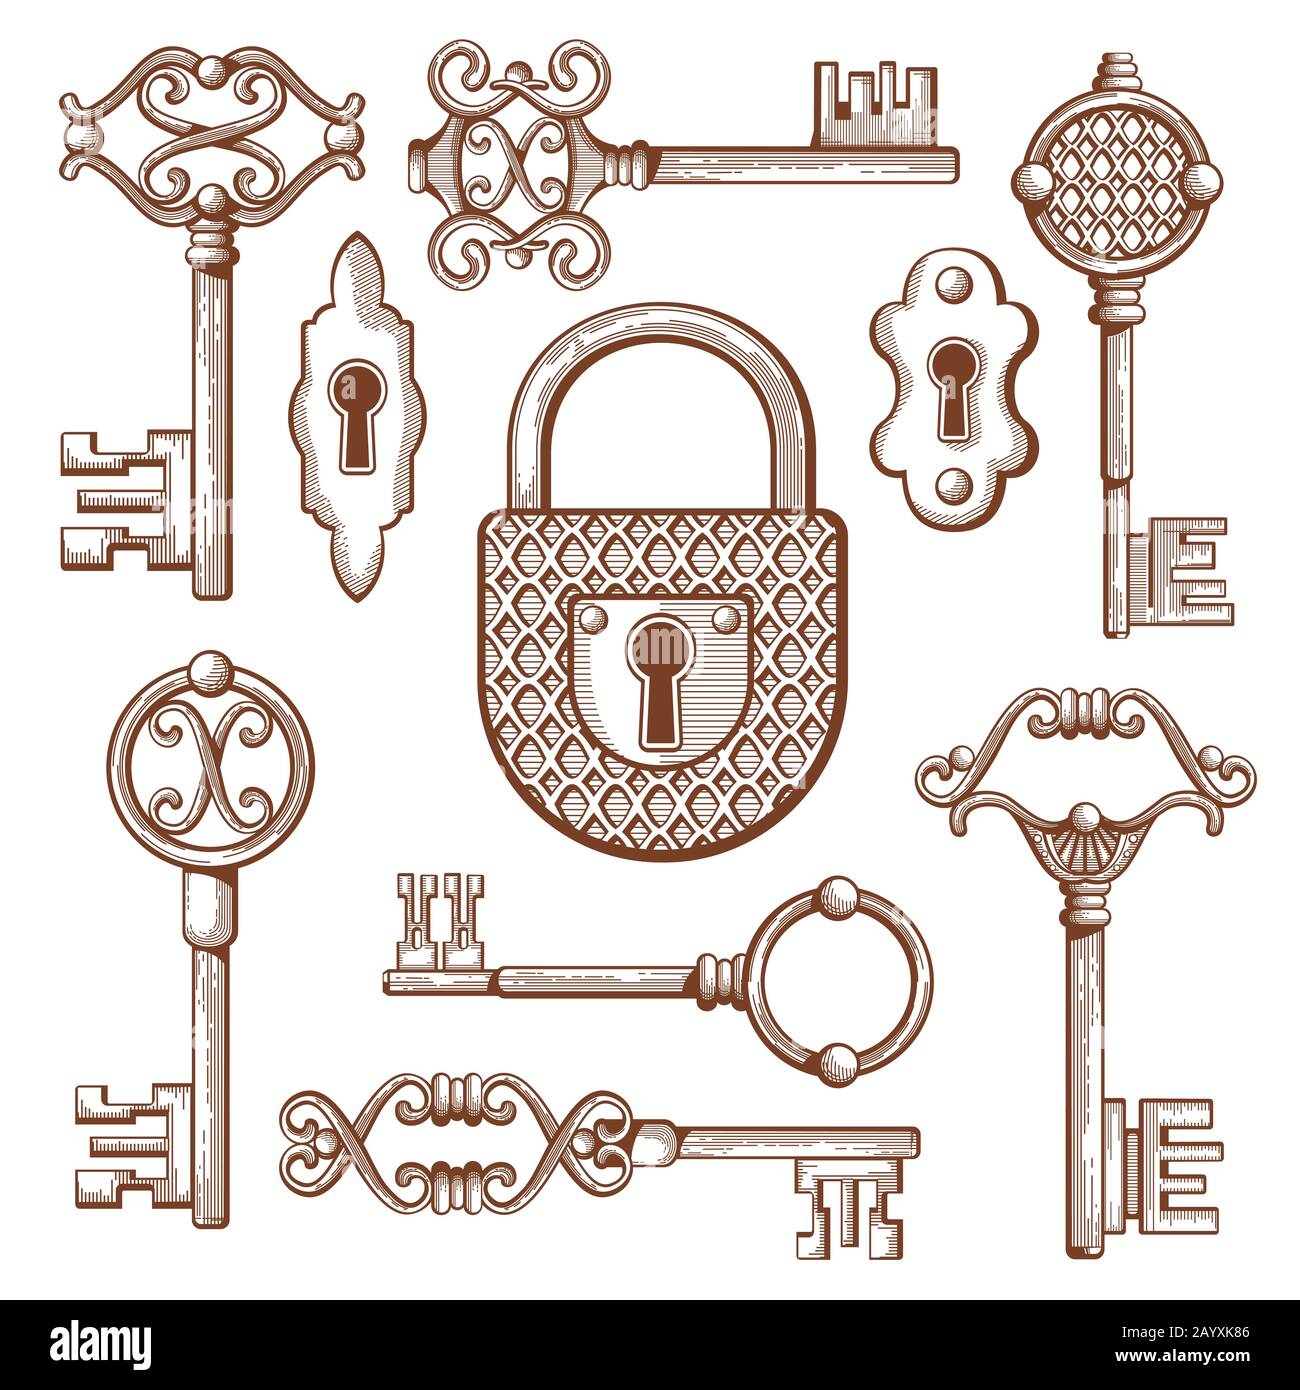 Old Padlock Drawn in Vintage Style. Engraved Retro Drawing of Lock with  Keyhole, Hole and Closed Shackle Stock Vector - Illustration of keyhole,  vintage: 249362714